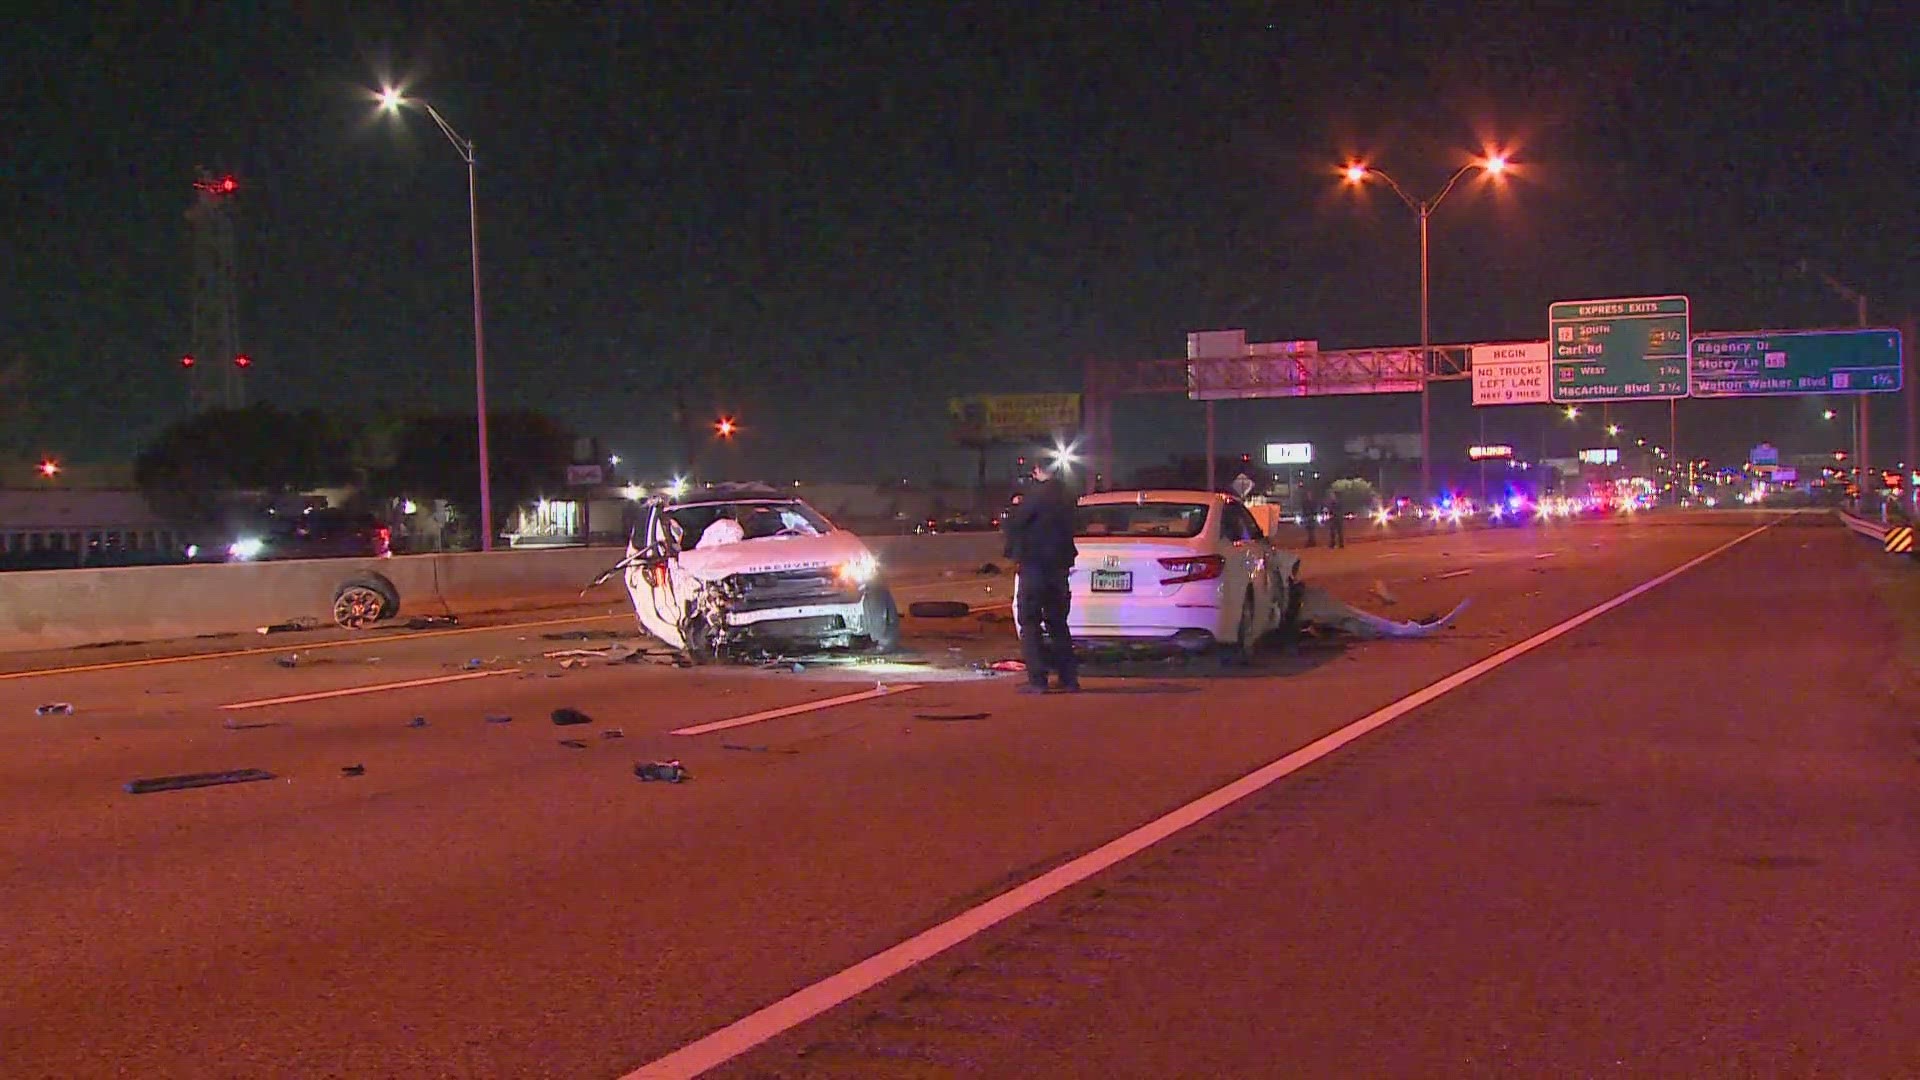 Police told WFAA that the crash at about midnight Monday morning in westbound SH-183.